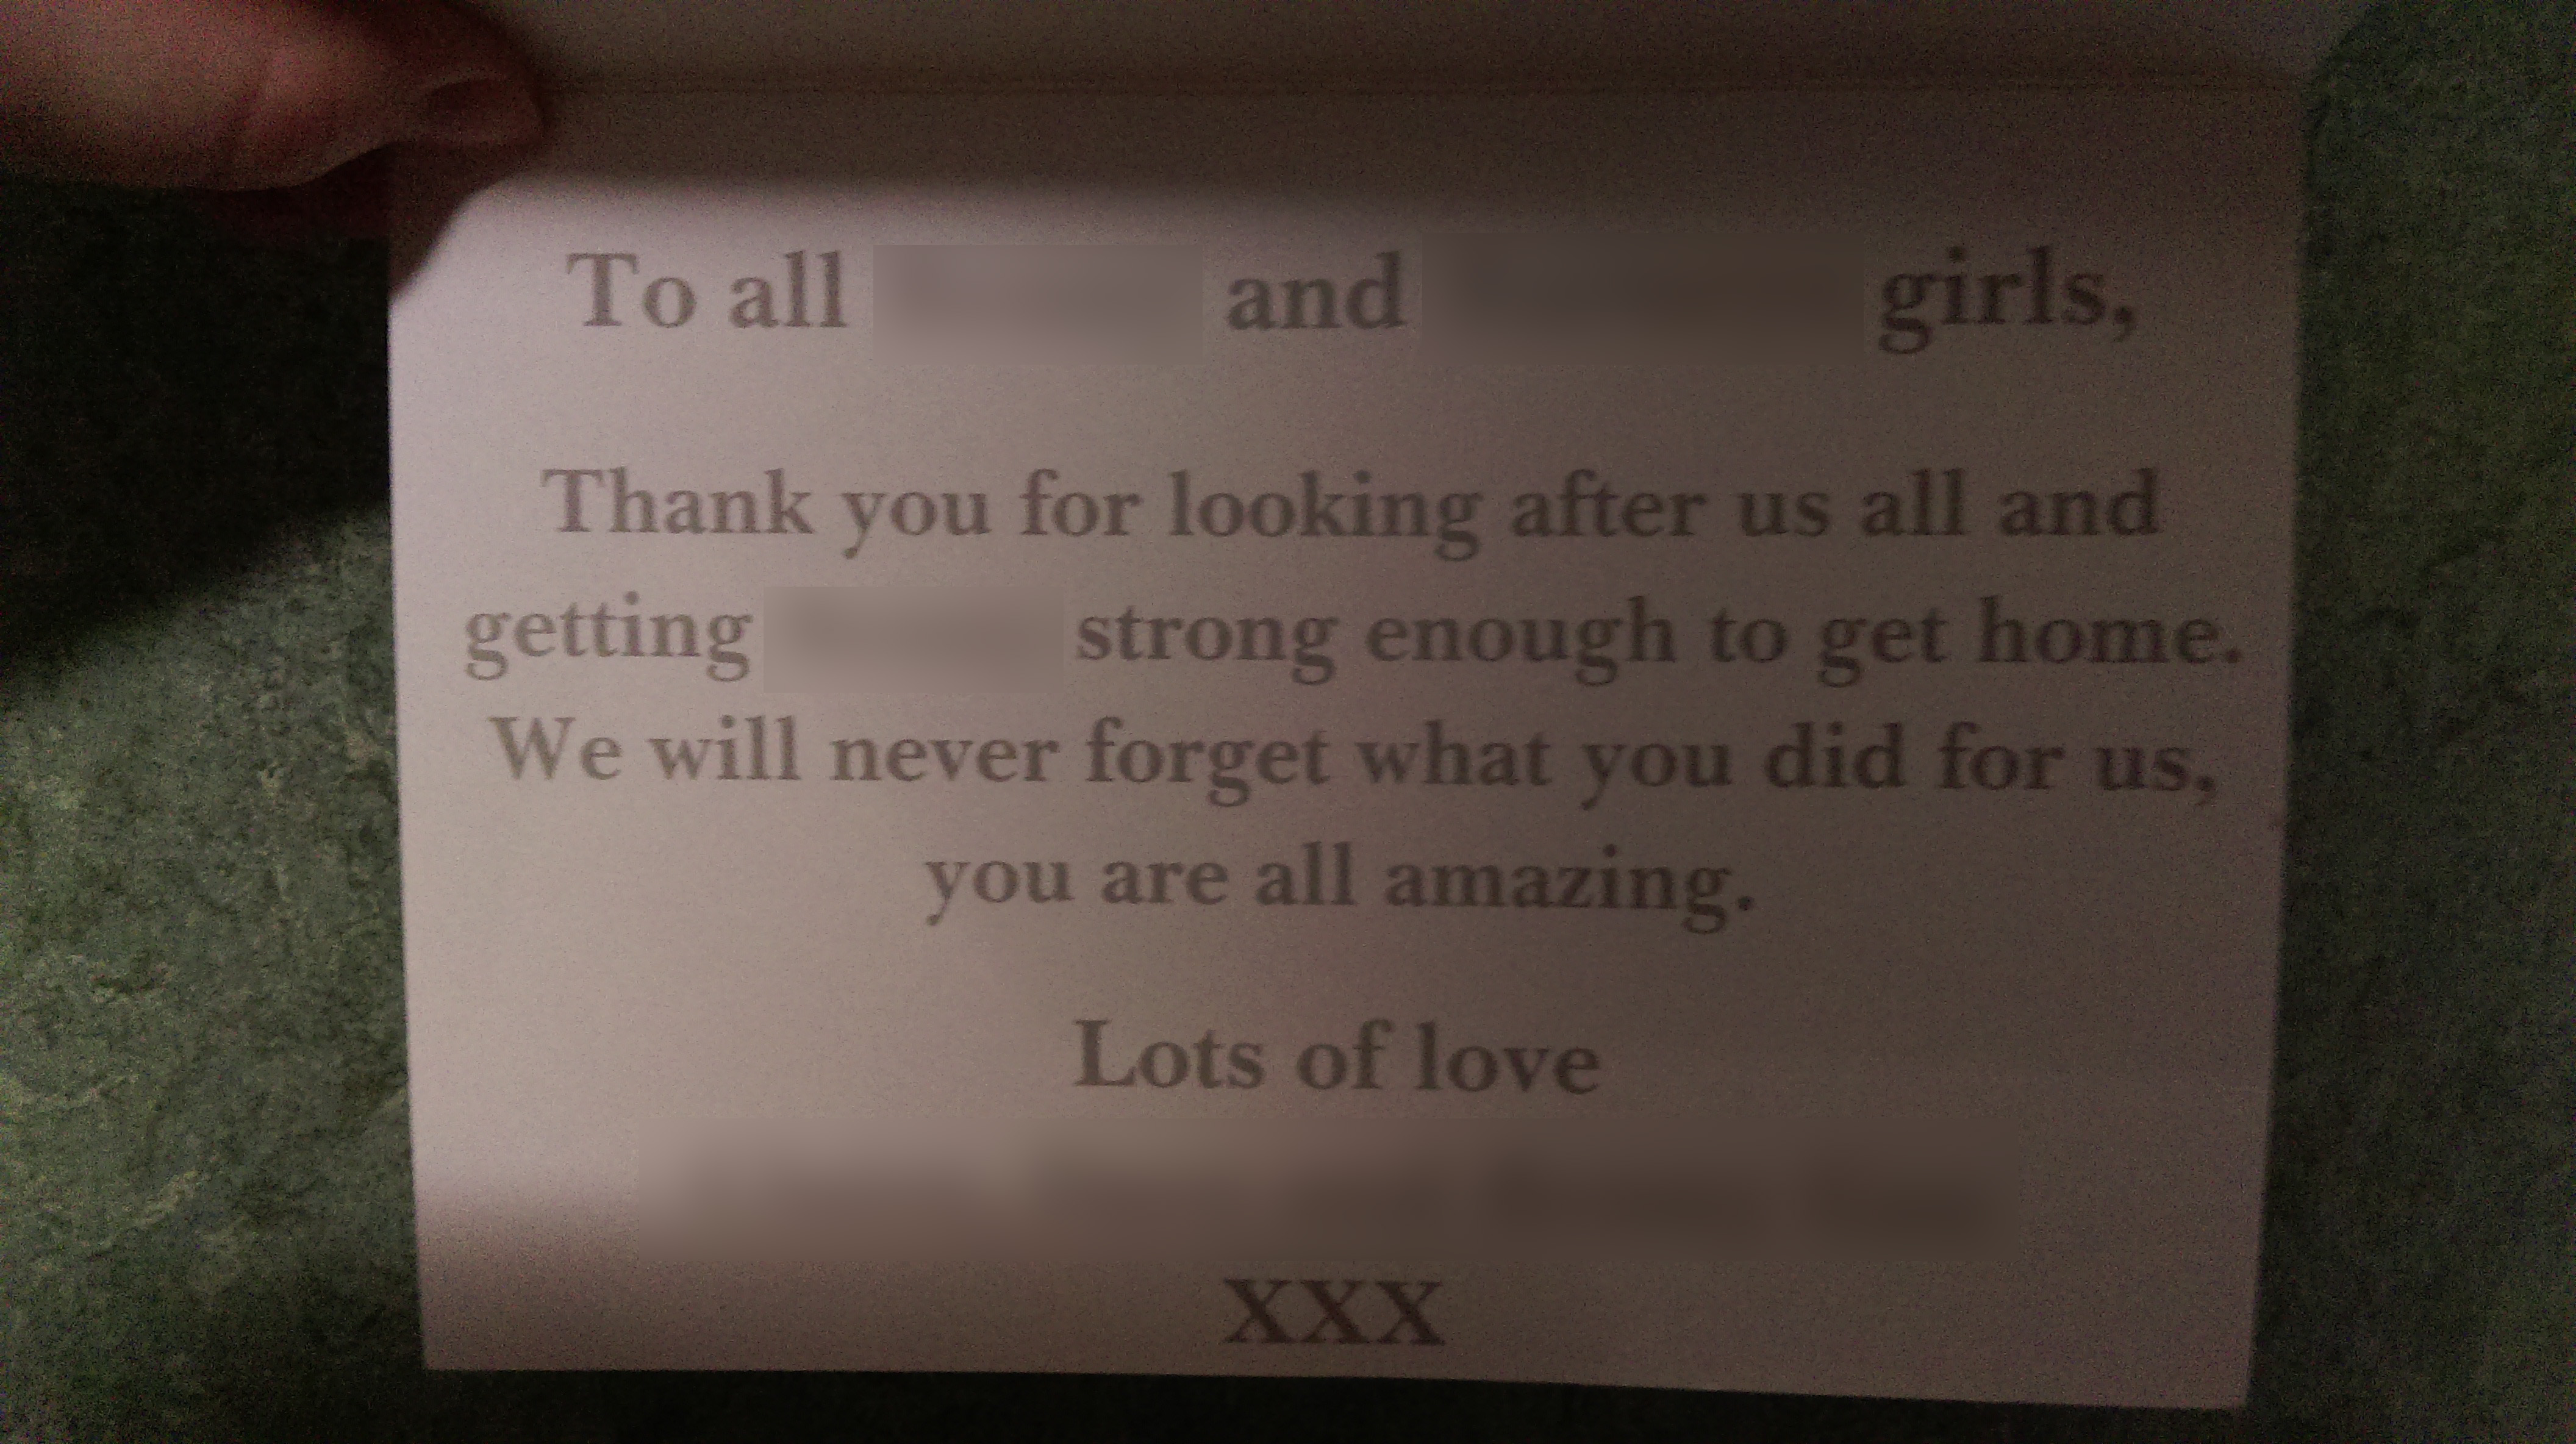 Thank you card to neonatal staff at the Countess of Chester